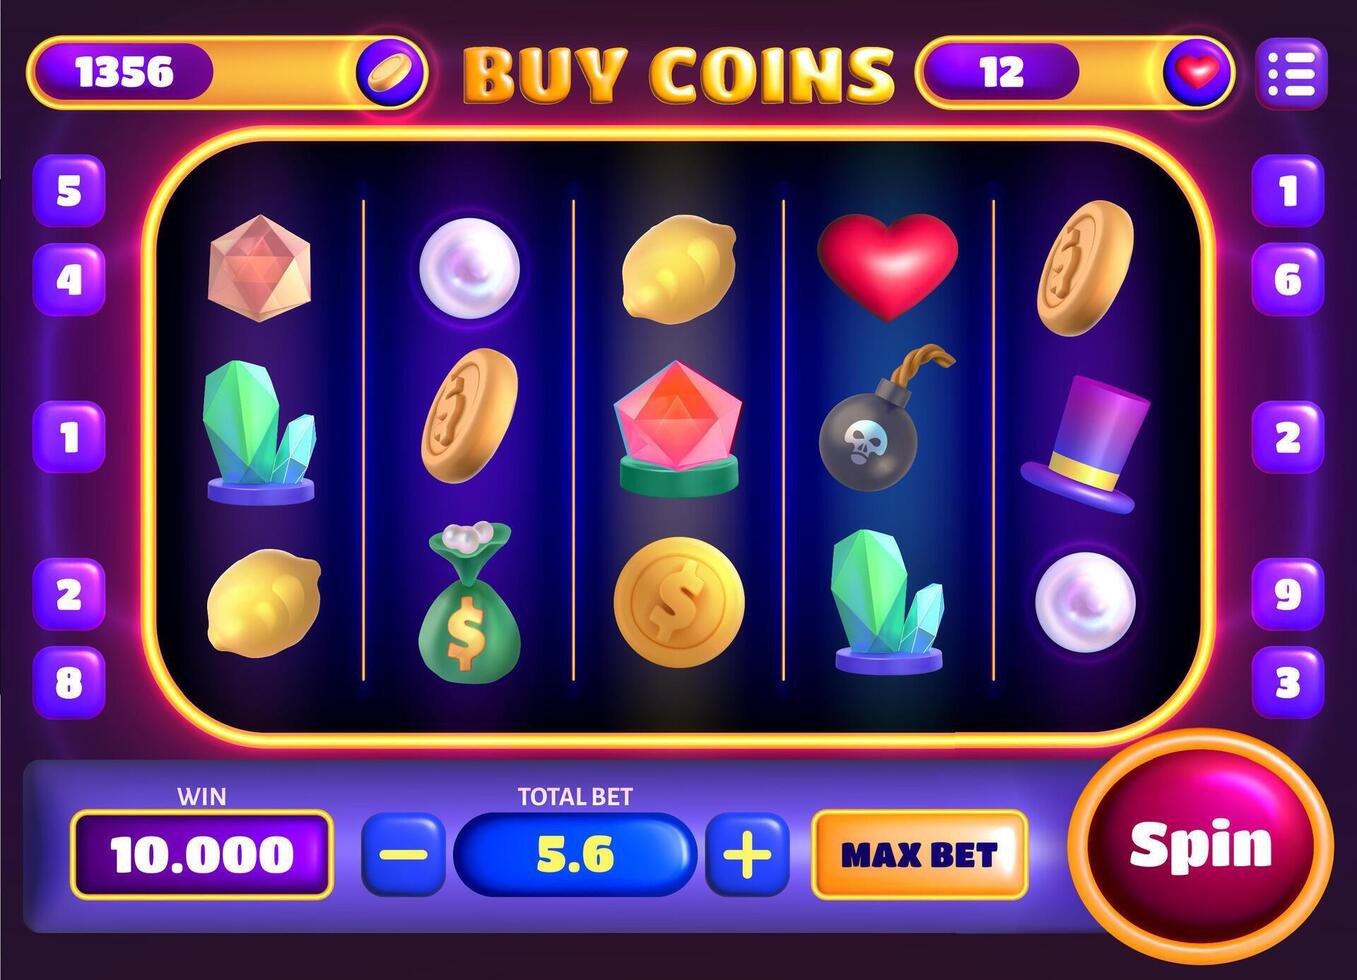 Casino slots gameplay main screen. Gambling ui icons, cartoon elements or buttons set. Design game interface elements, assets and lucky symbols for mobile gamble app or slot machine vector